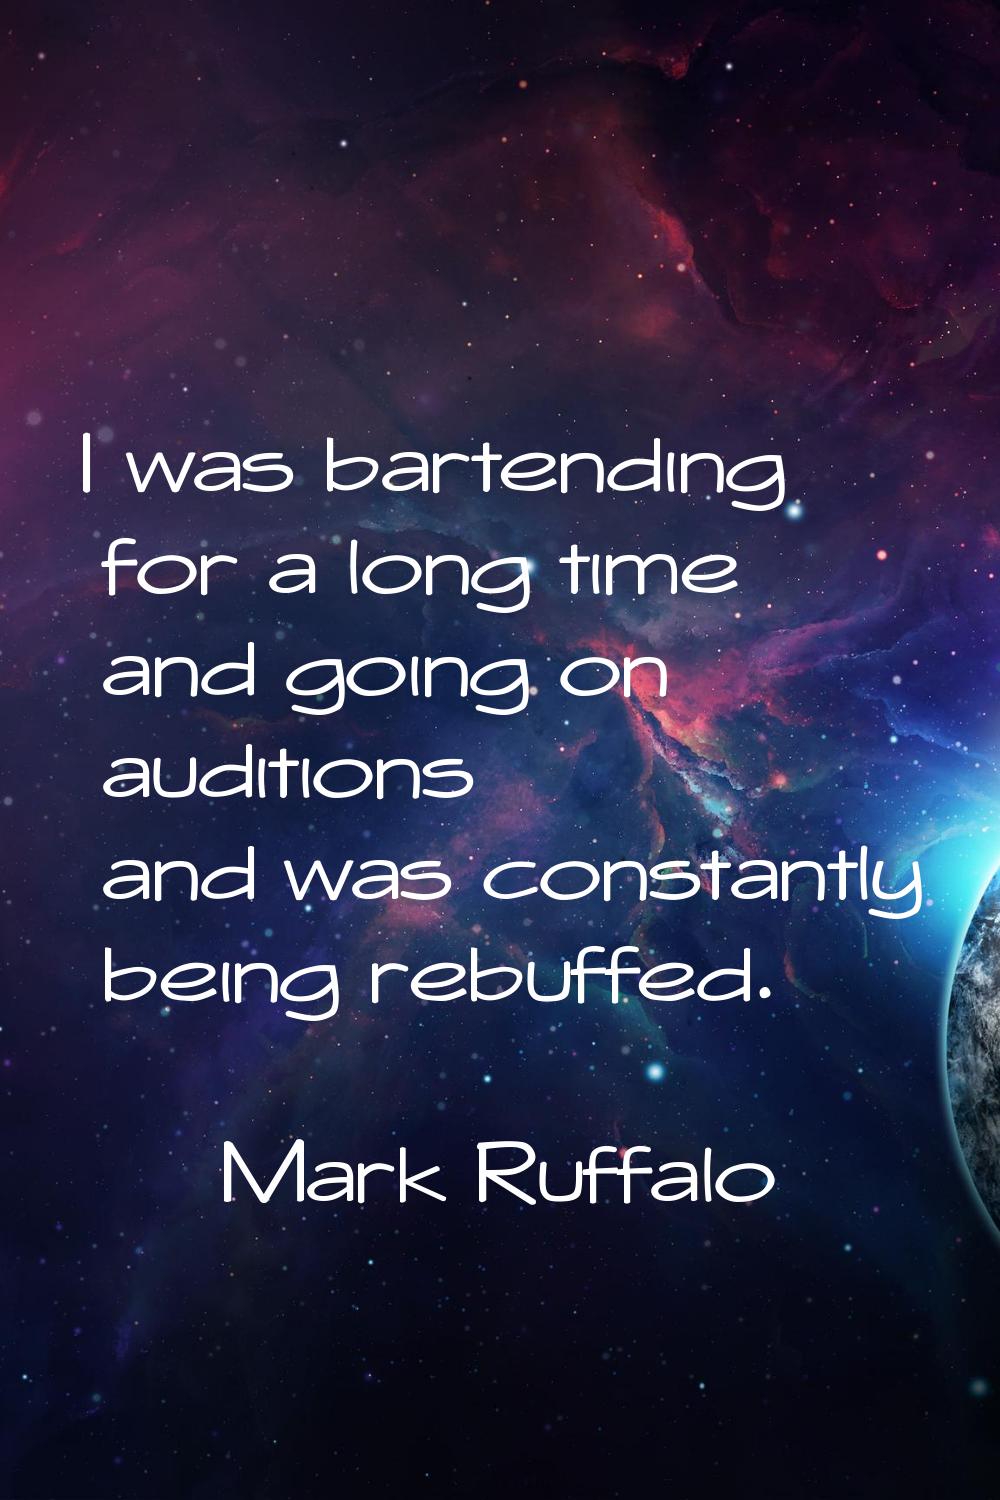 I was bartending for a long time and going on auditions and was constantly being rebuffed.